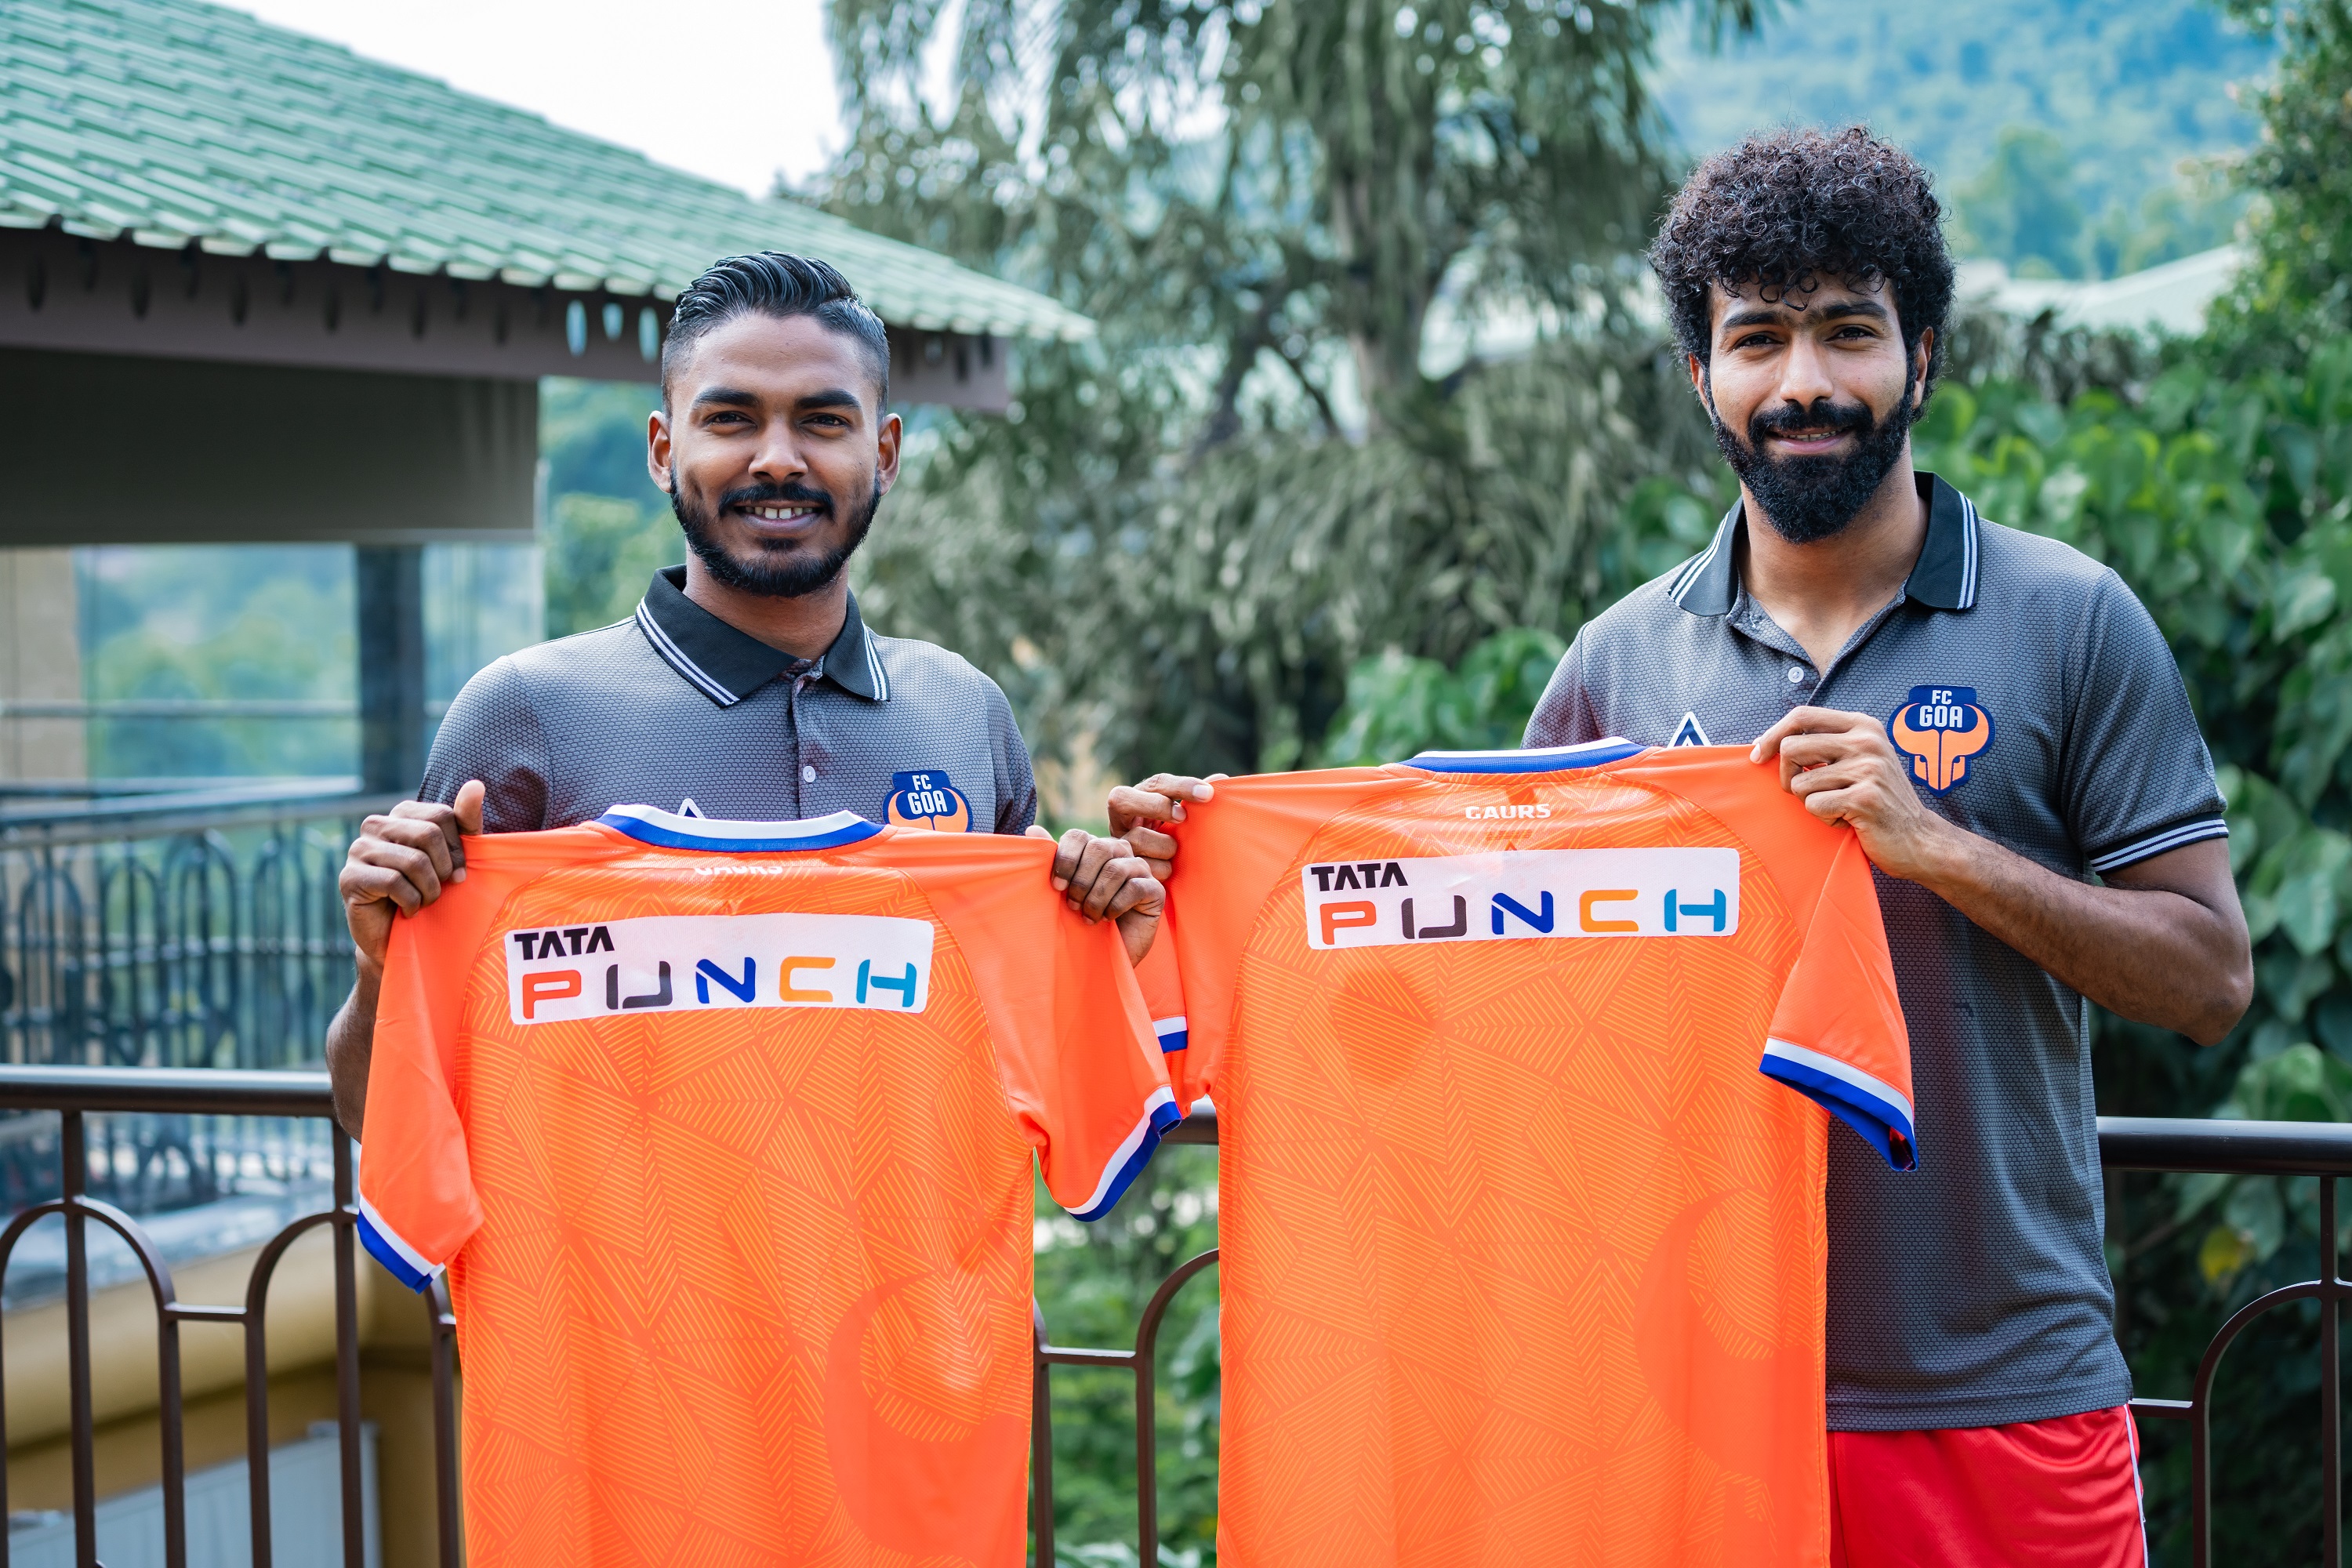 tata-punch-signs-with-fc-goa-as-principal-sponsor-for-hero-indian-super-league-2021-22